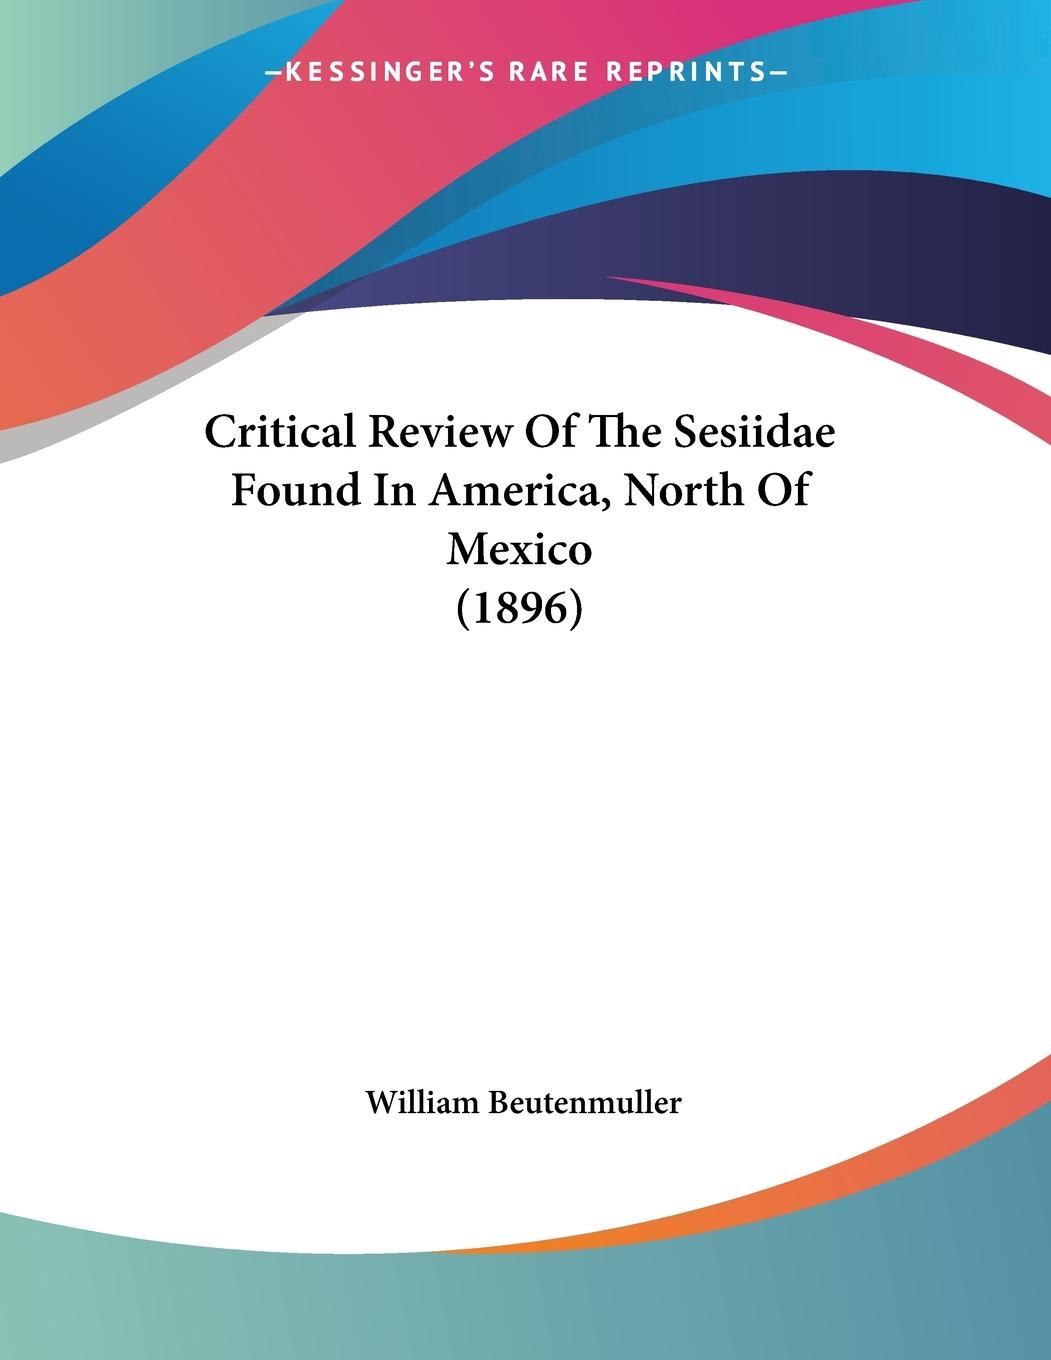 Critical Review Of The Sesiidae Found In America, North Of Mexico (1896) - Beutenmuller, William